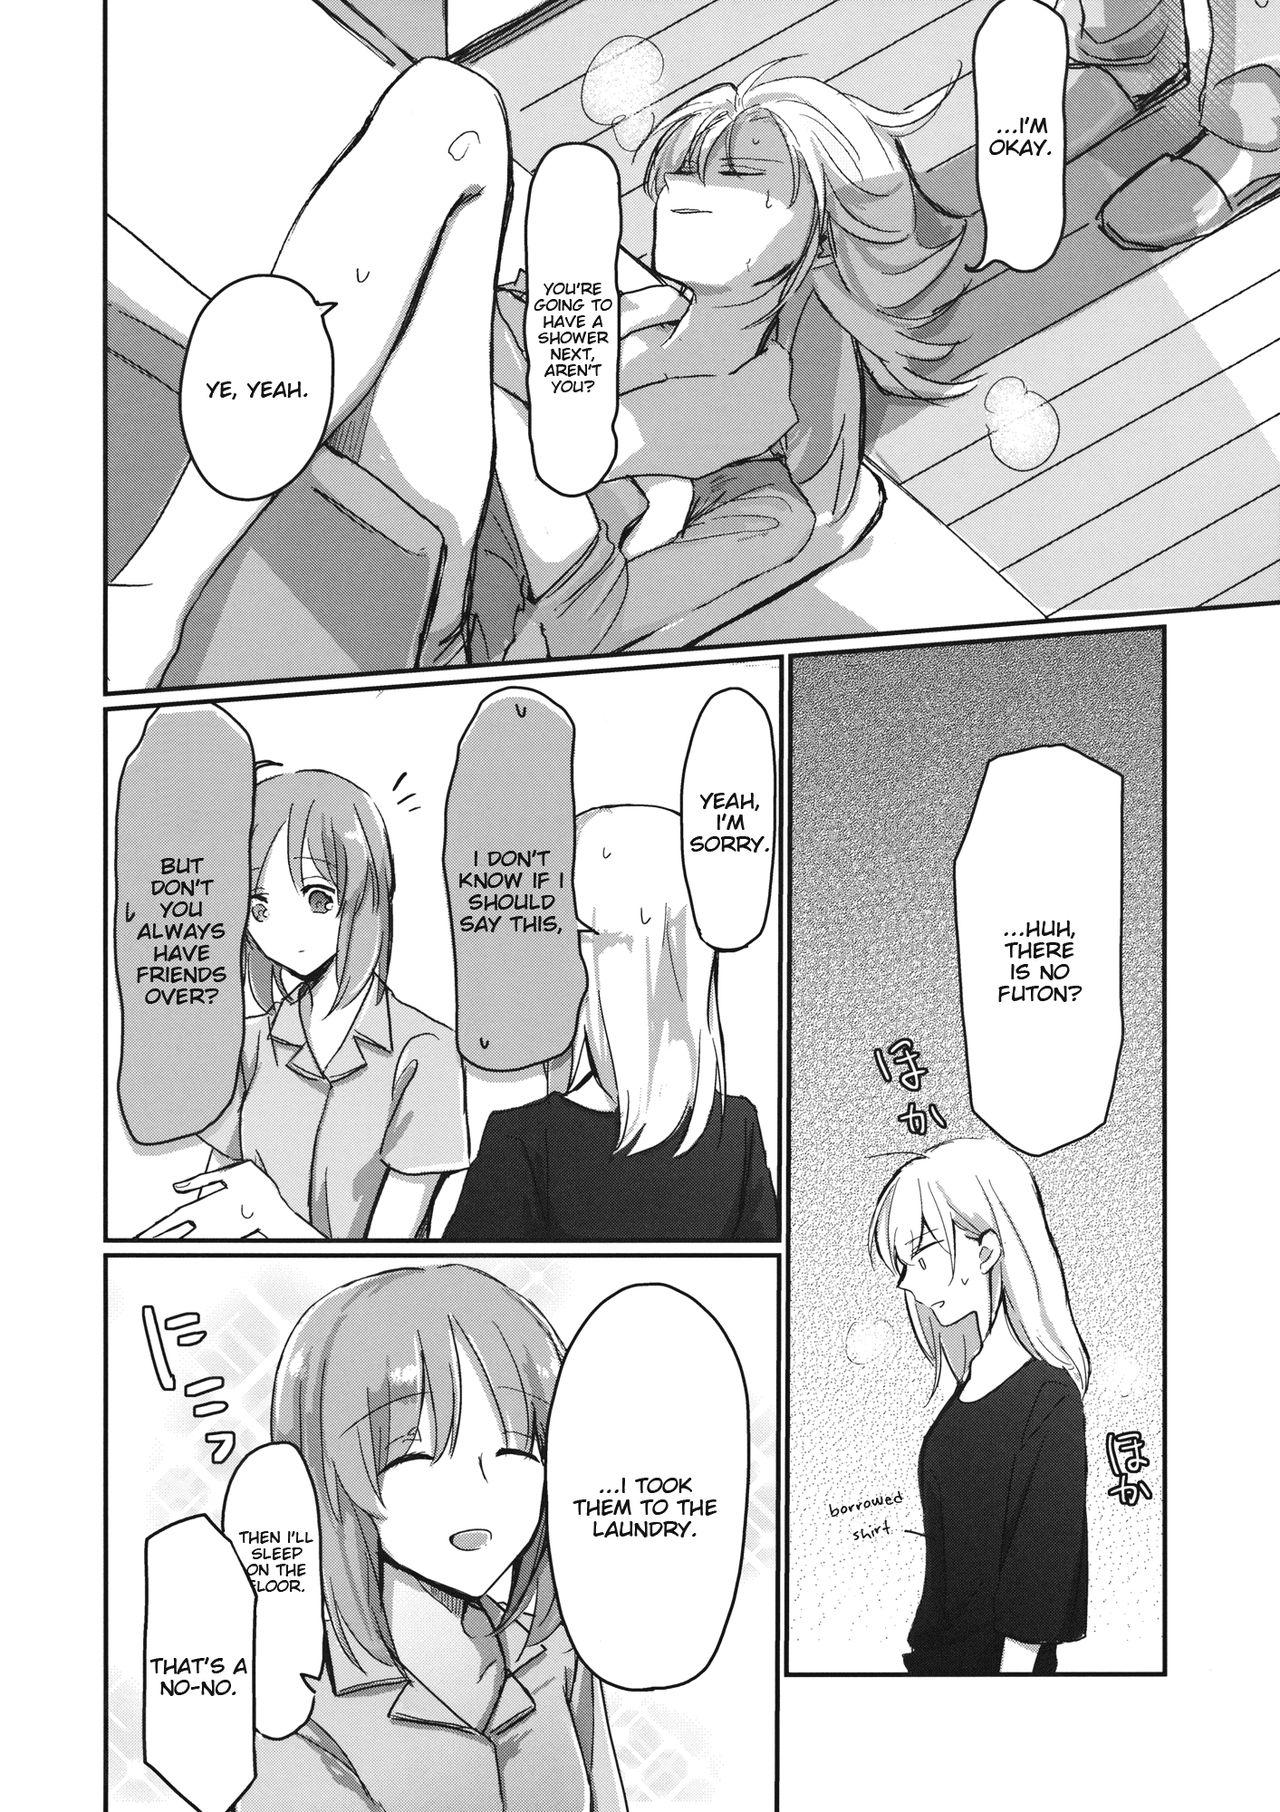 Leaked for the first time - Girls und panzer Pareja - Page 7